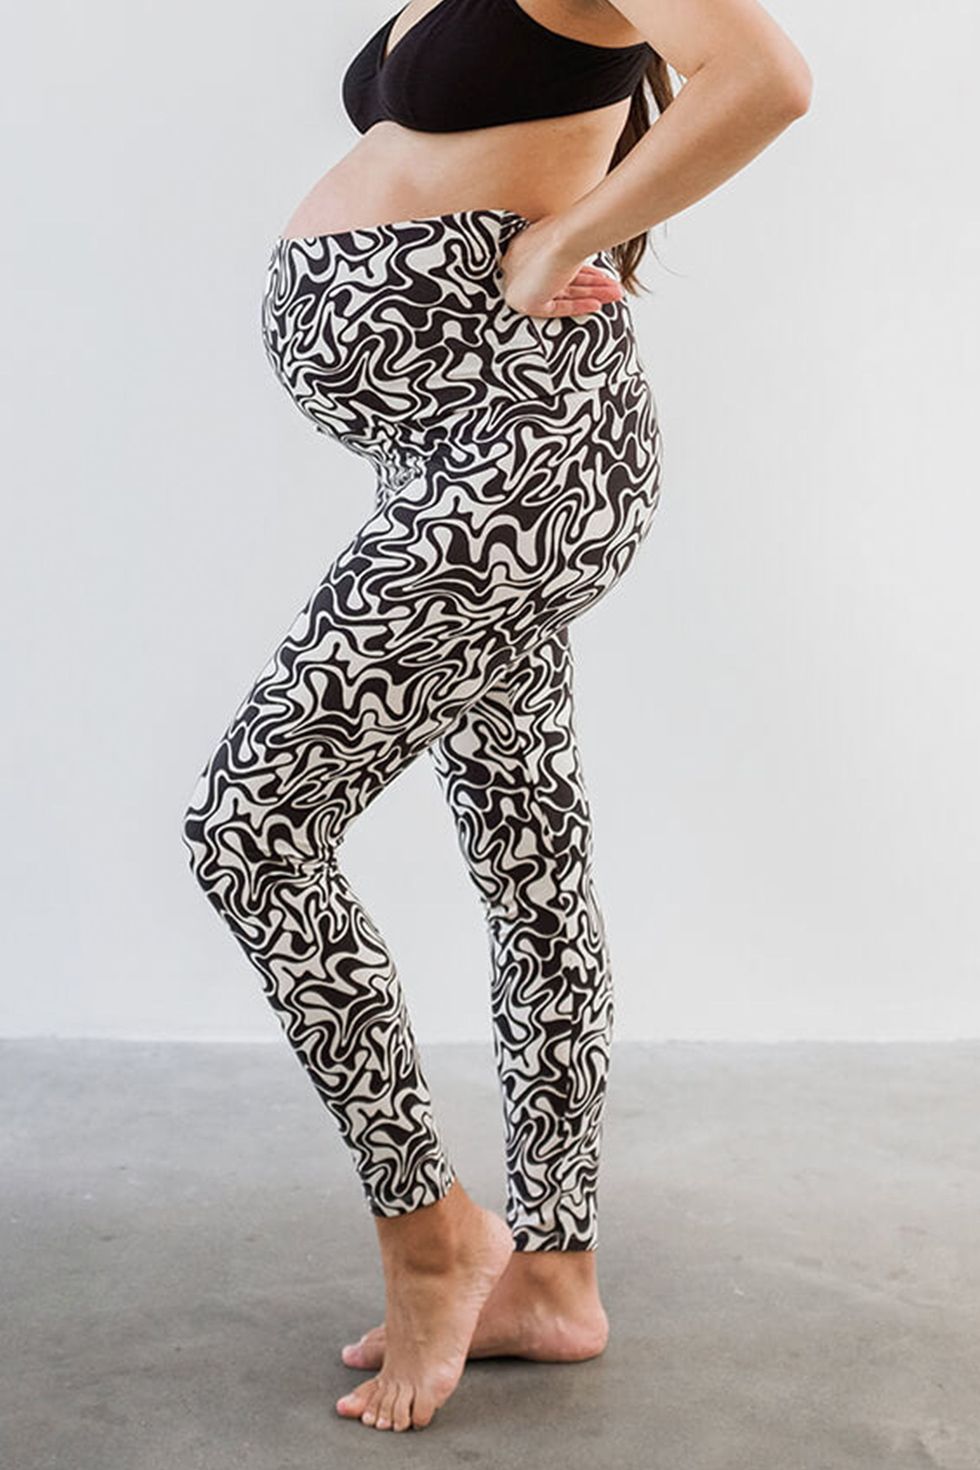 Pact Maternity Go-to Legging Made With Organic Cotton